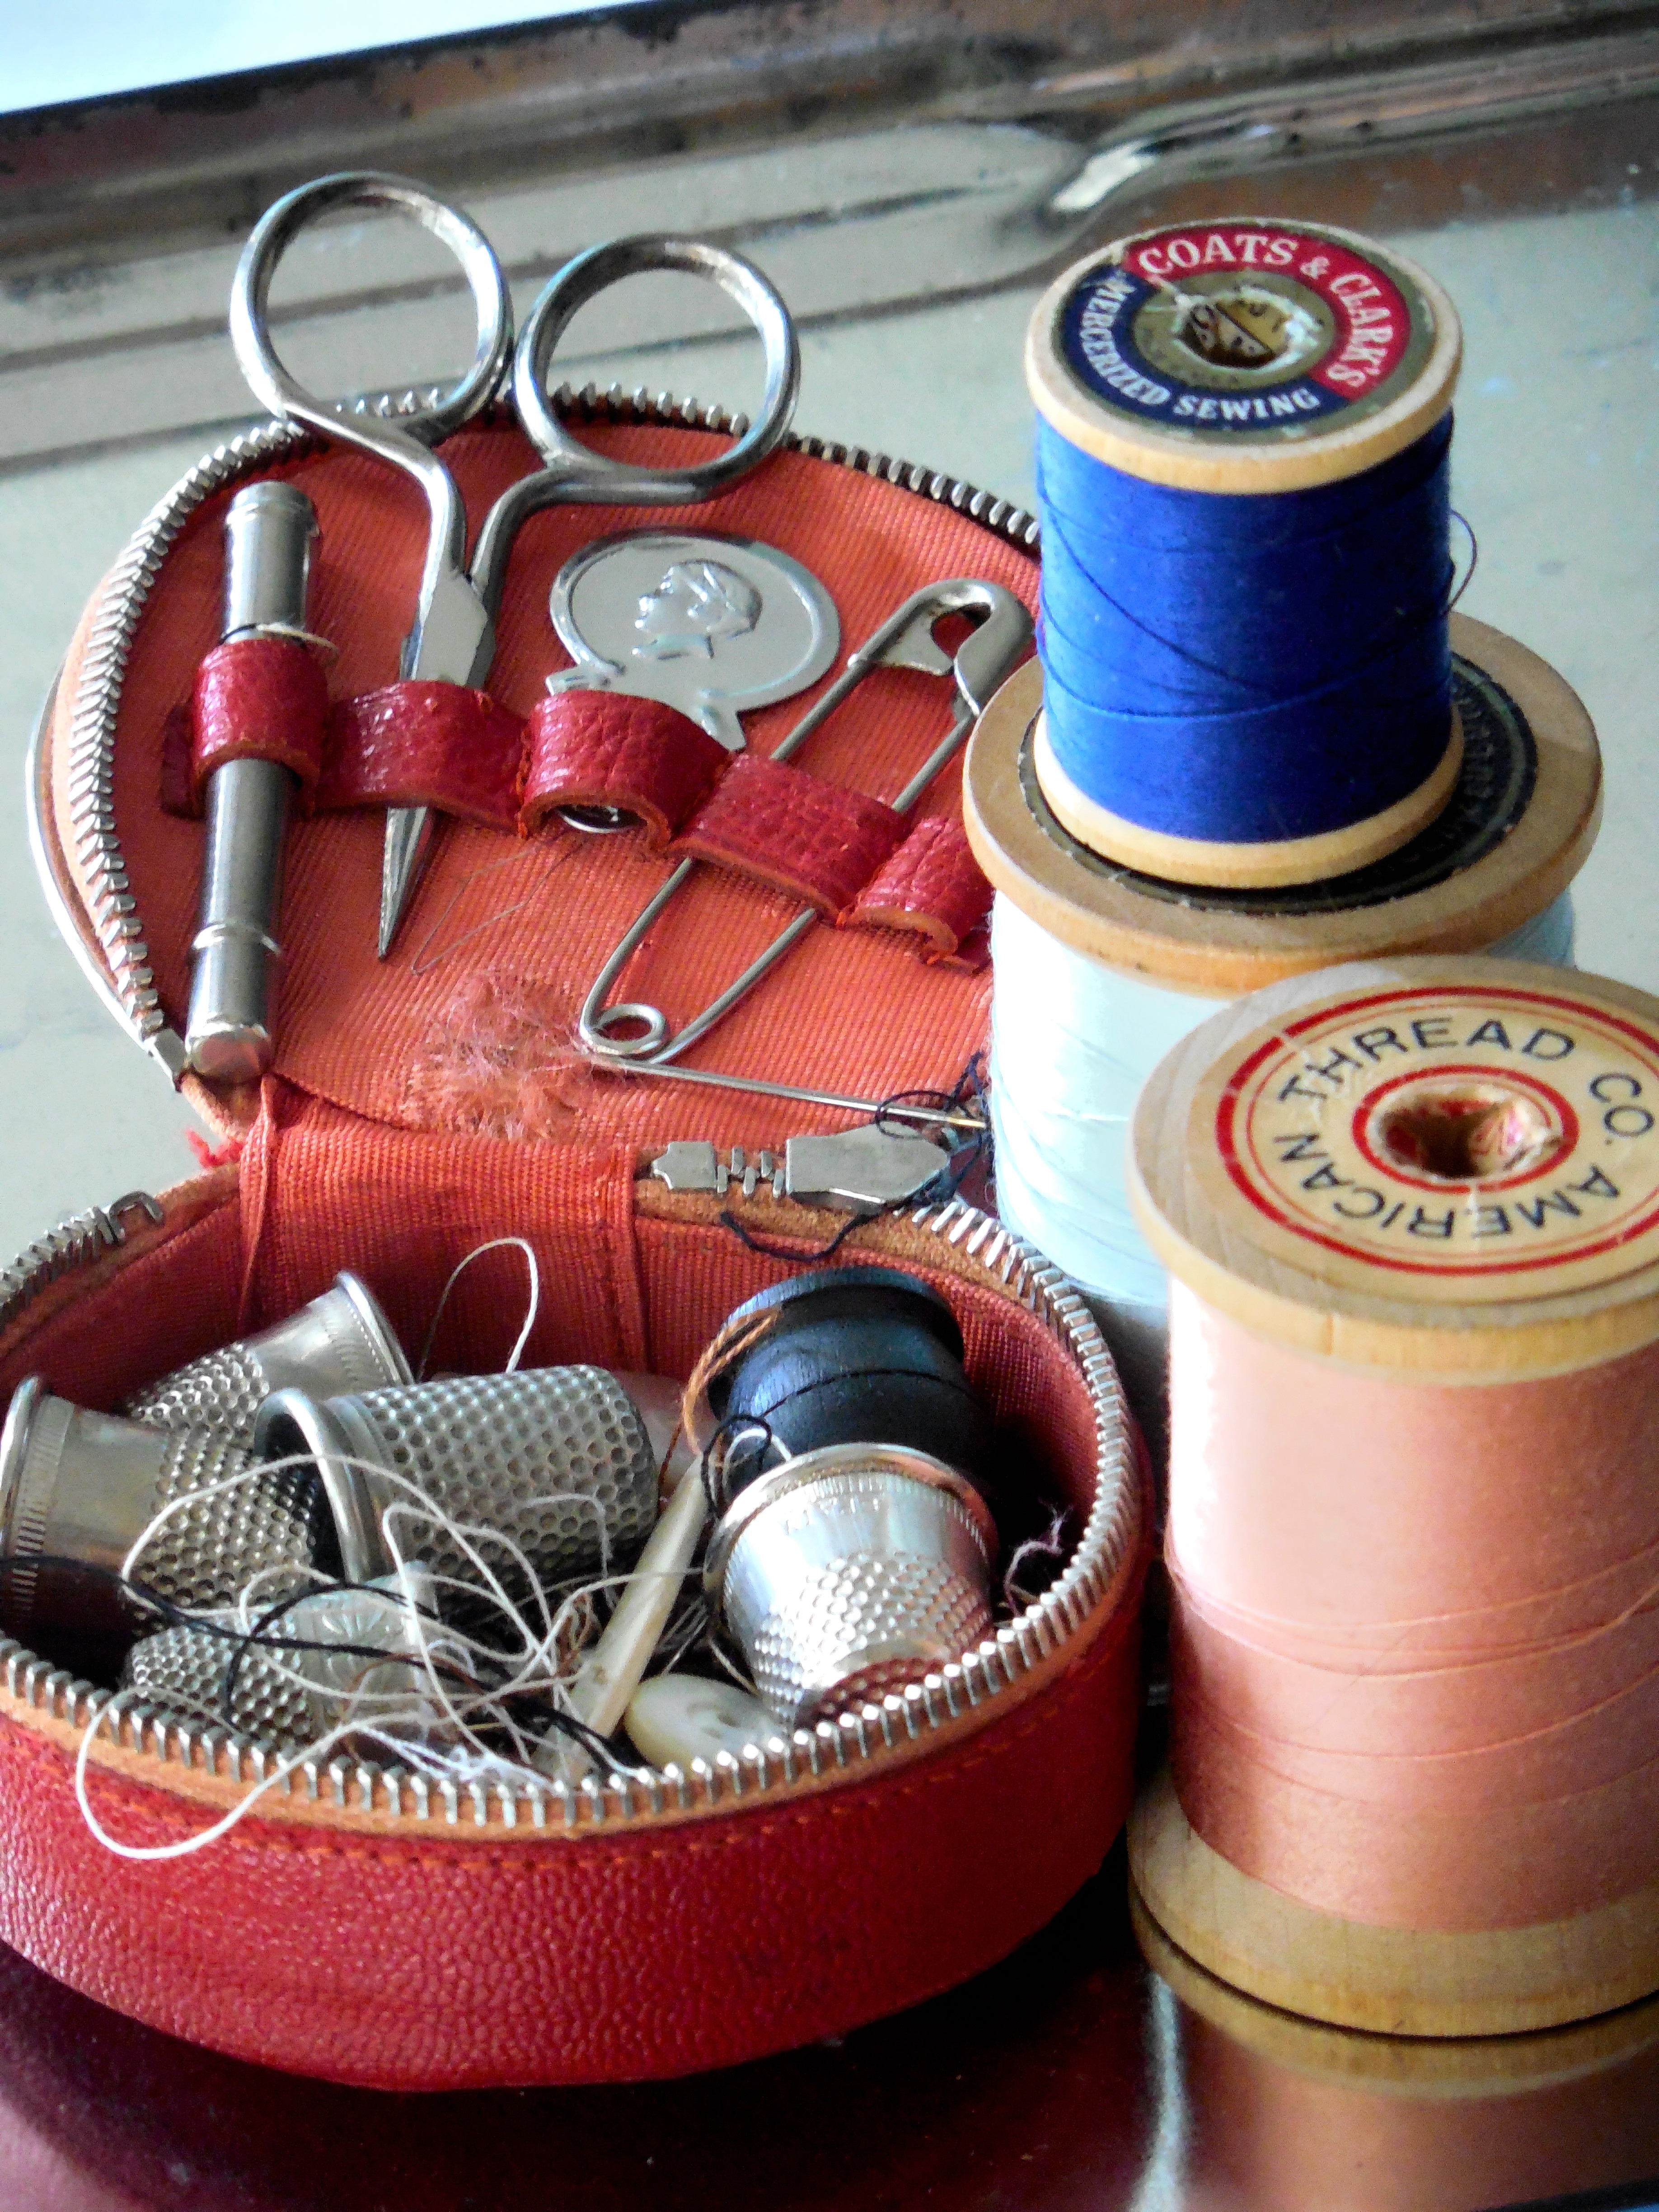 2 spools of thread with sewing supplies (scissors, thimbles) in a red bag